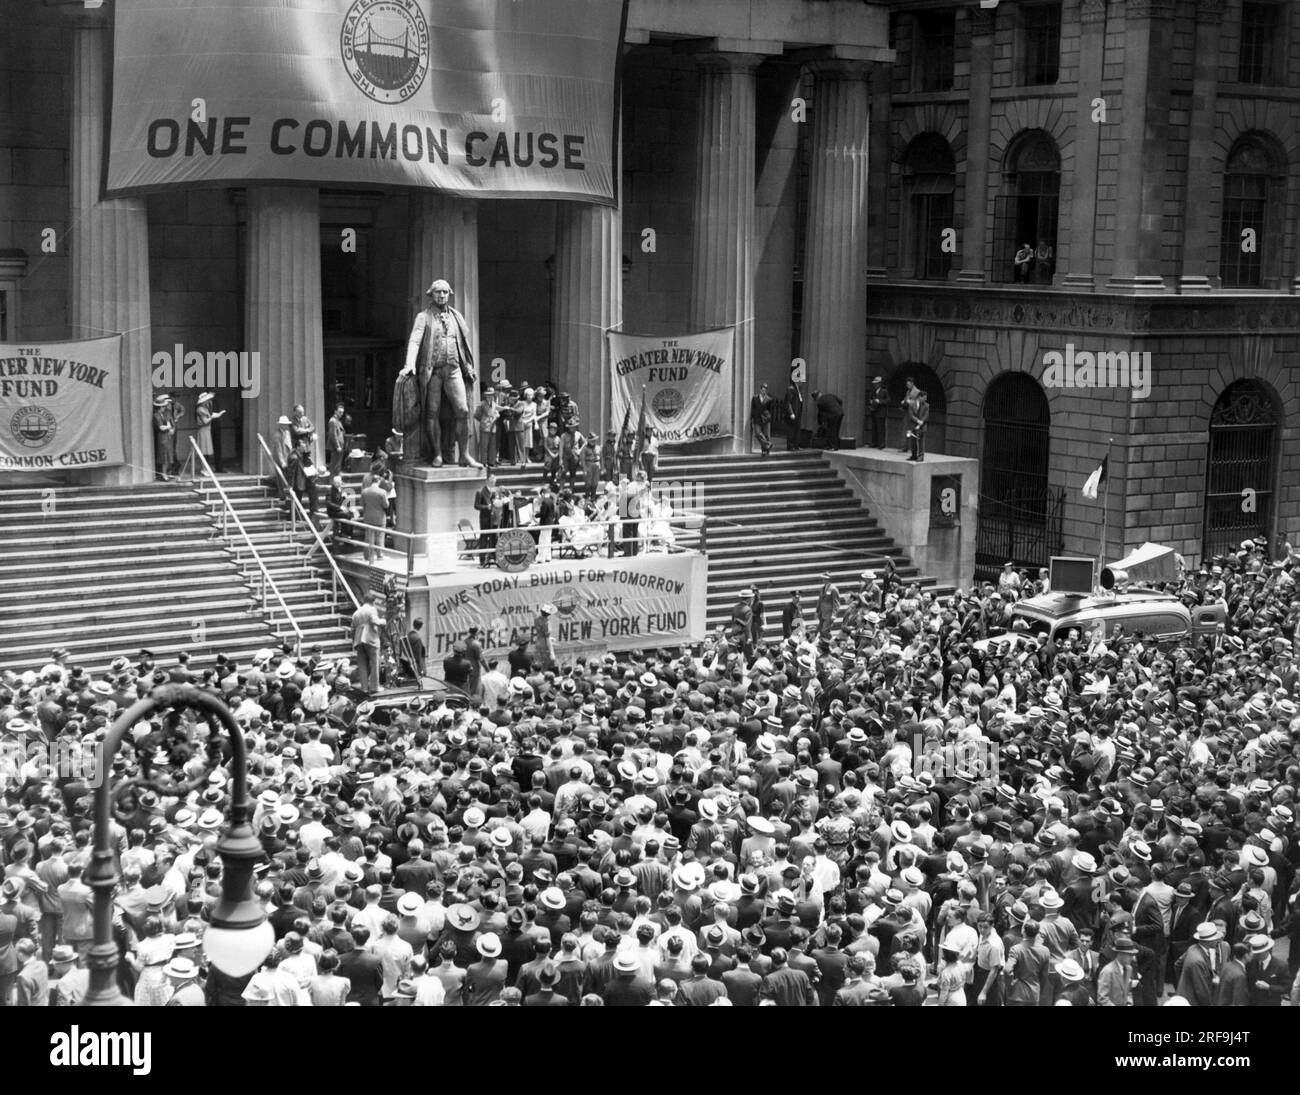 New York, New York:    c. 1938 A fund raiser for 'One Common Cause', for the greater New York area. Johny Weismuller and Benny Goodman appeared on stage. Stock Photo